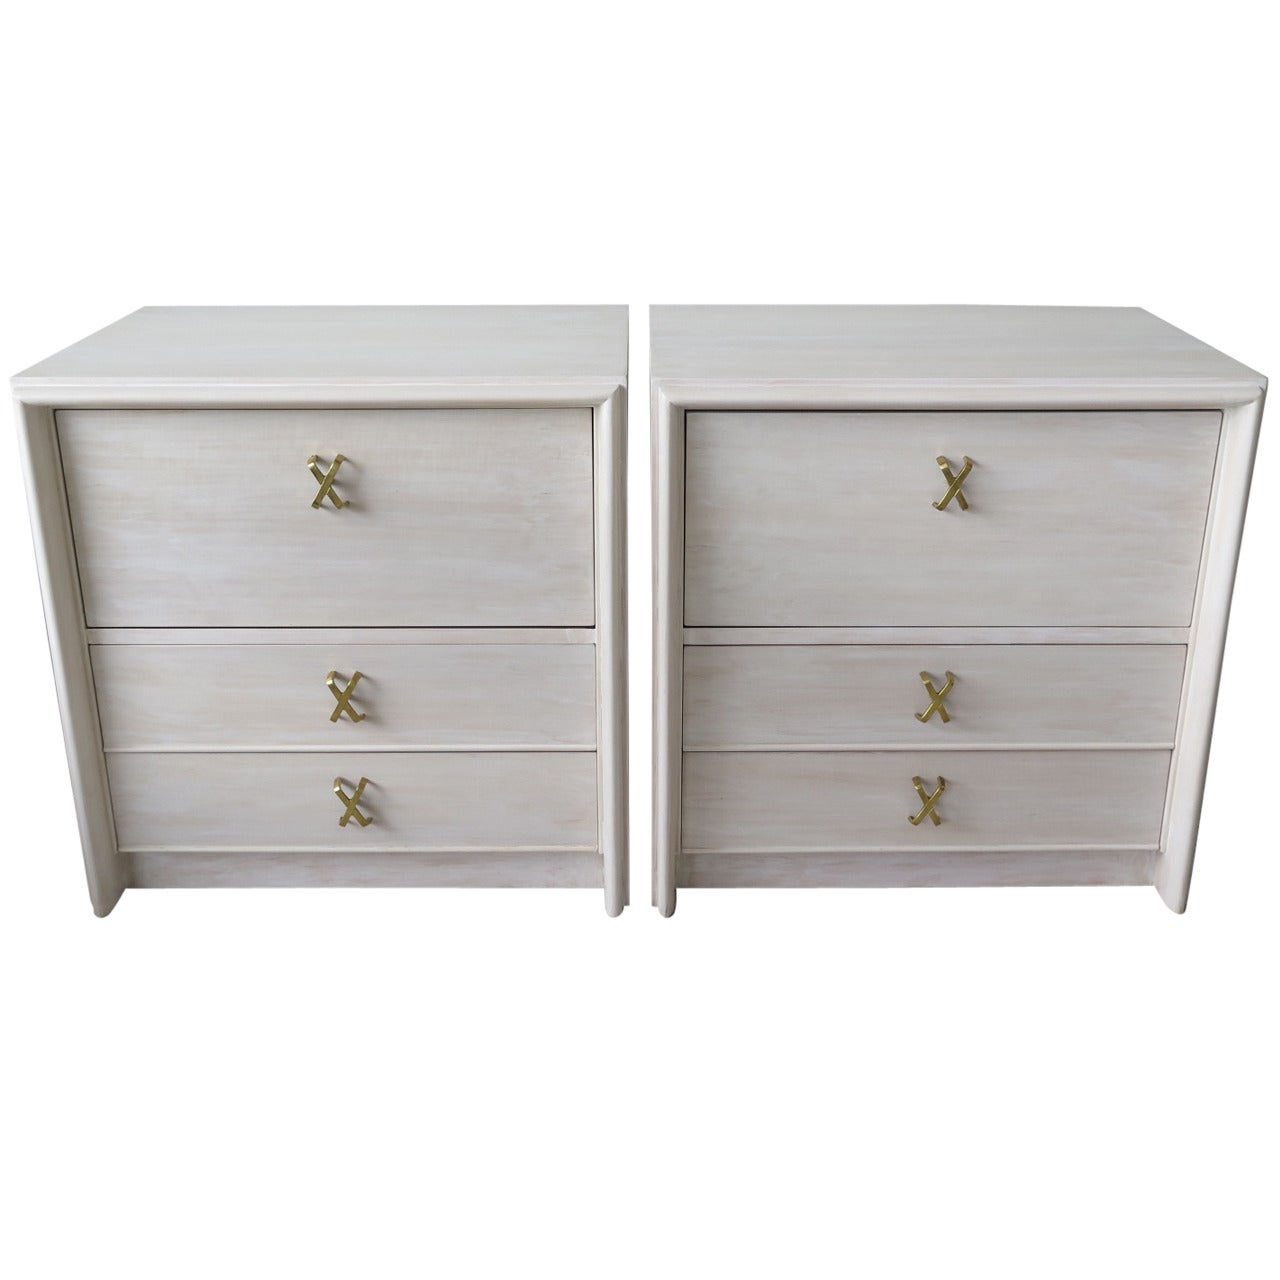 Pair of Paul Frankl Nightstands with Polished Brass Handles